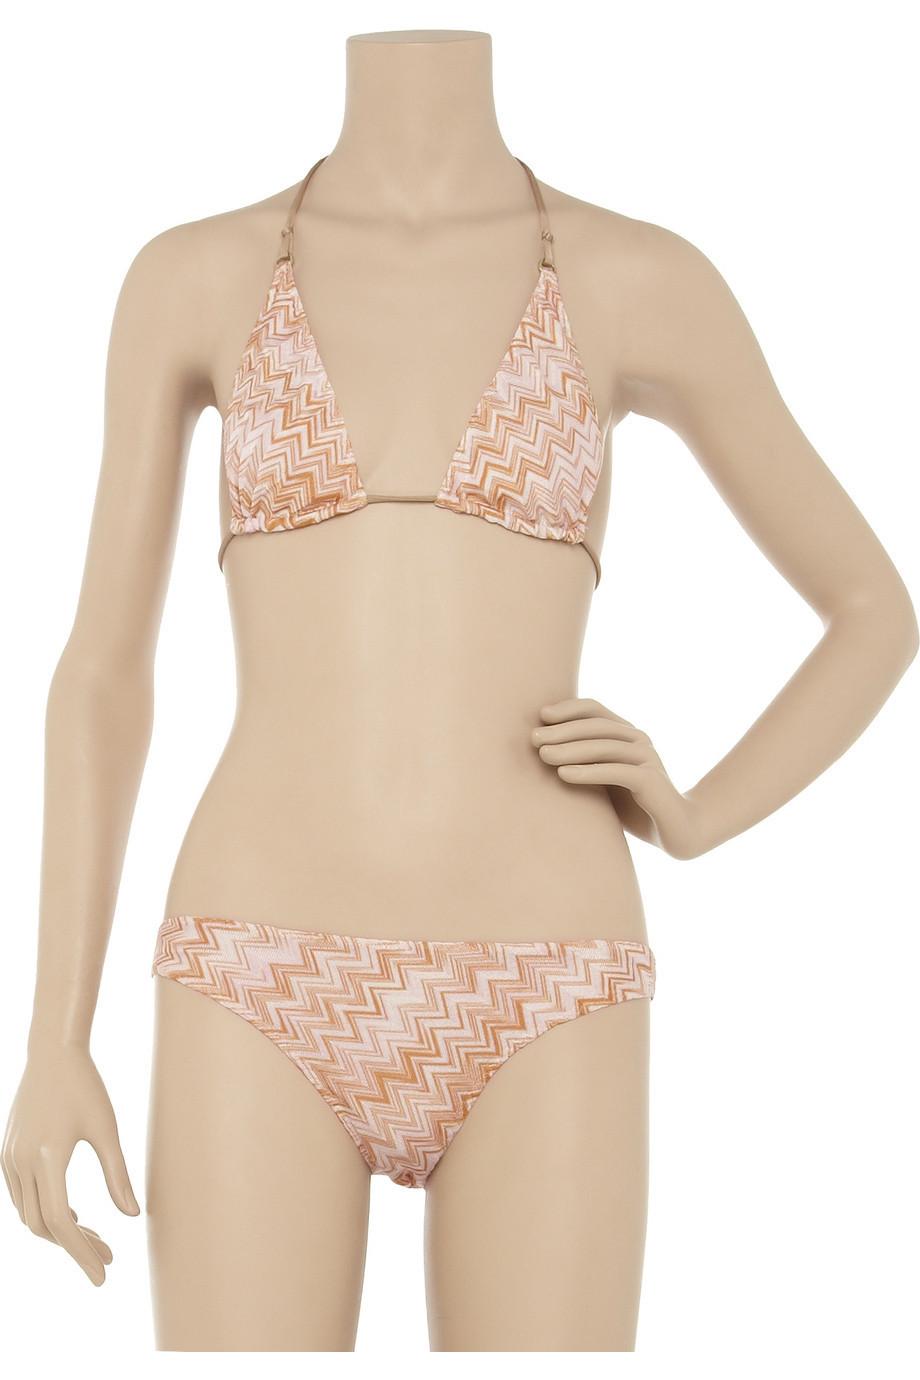 This stunning Missoni bikini is a '70s-inspired poolside piece. Team this classic crochet knit bikini with the matching kaftan for a beautifully bold vacation look.

Two pieces bikini
Tiestring, hardware on ends engraved 